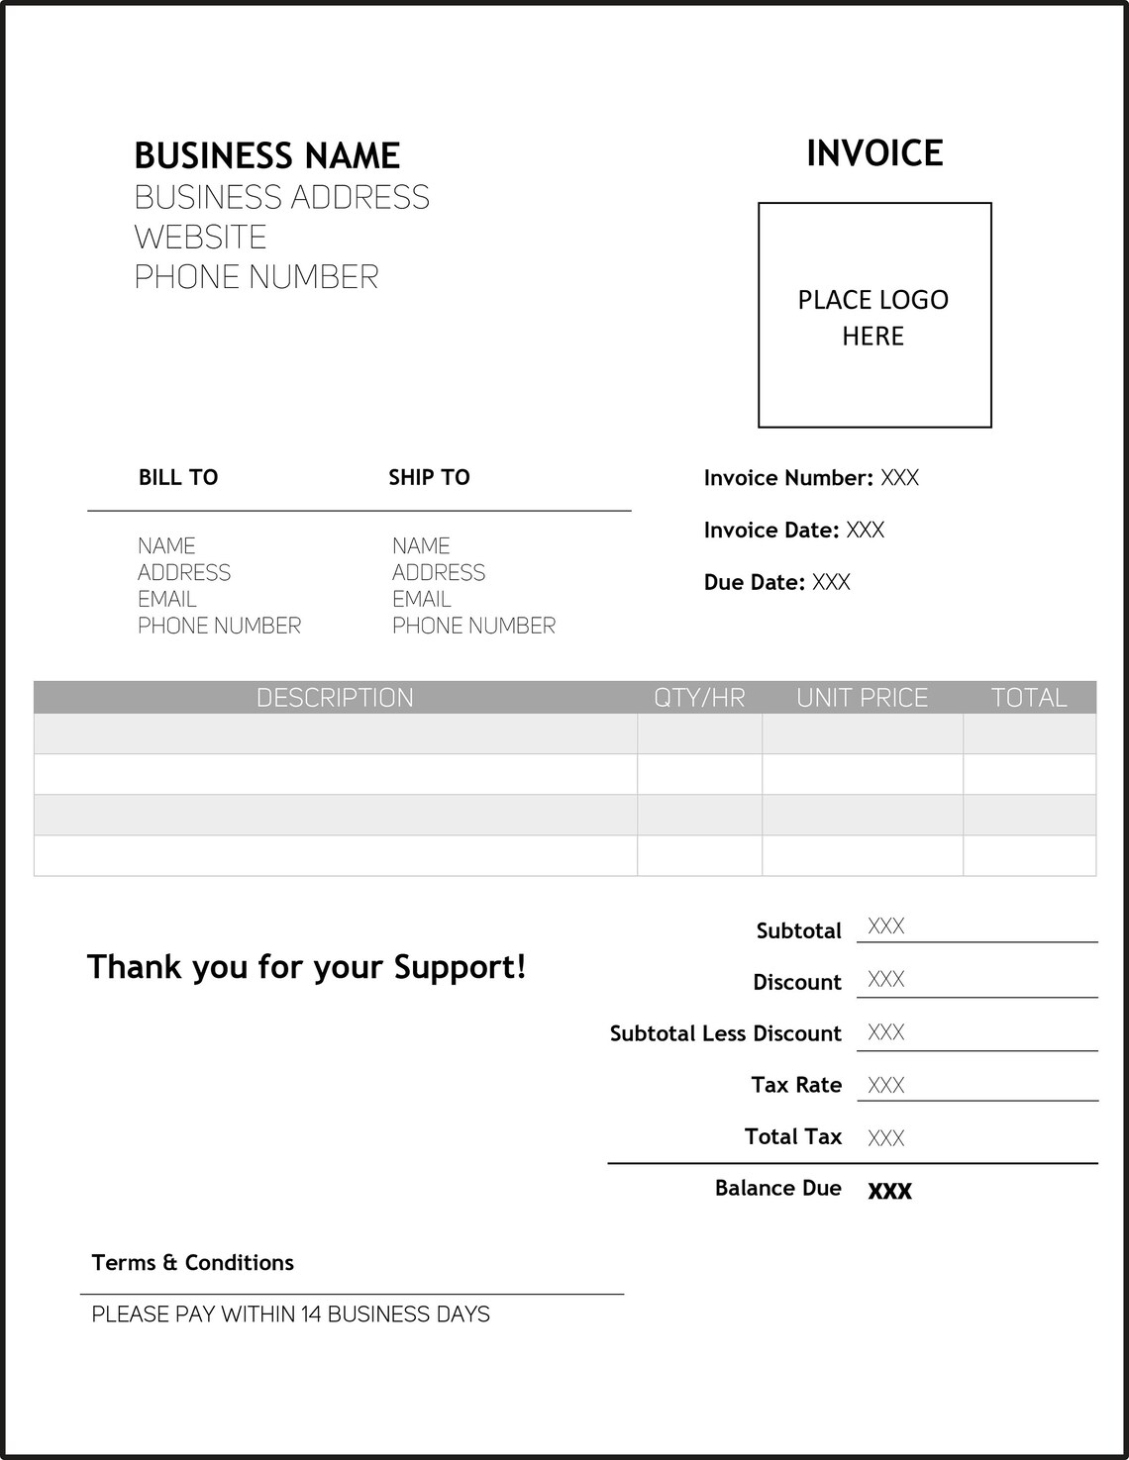 Invoice Template Printable Invoice Business Form | Etsy Singapore In Singapore Invoice Template